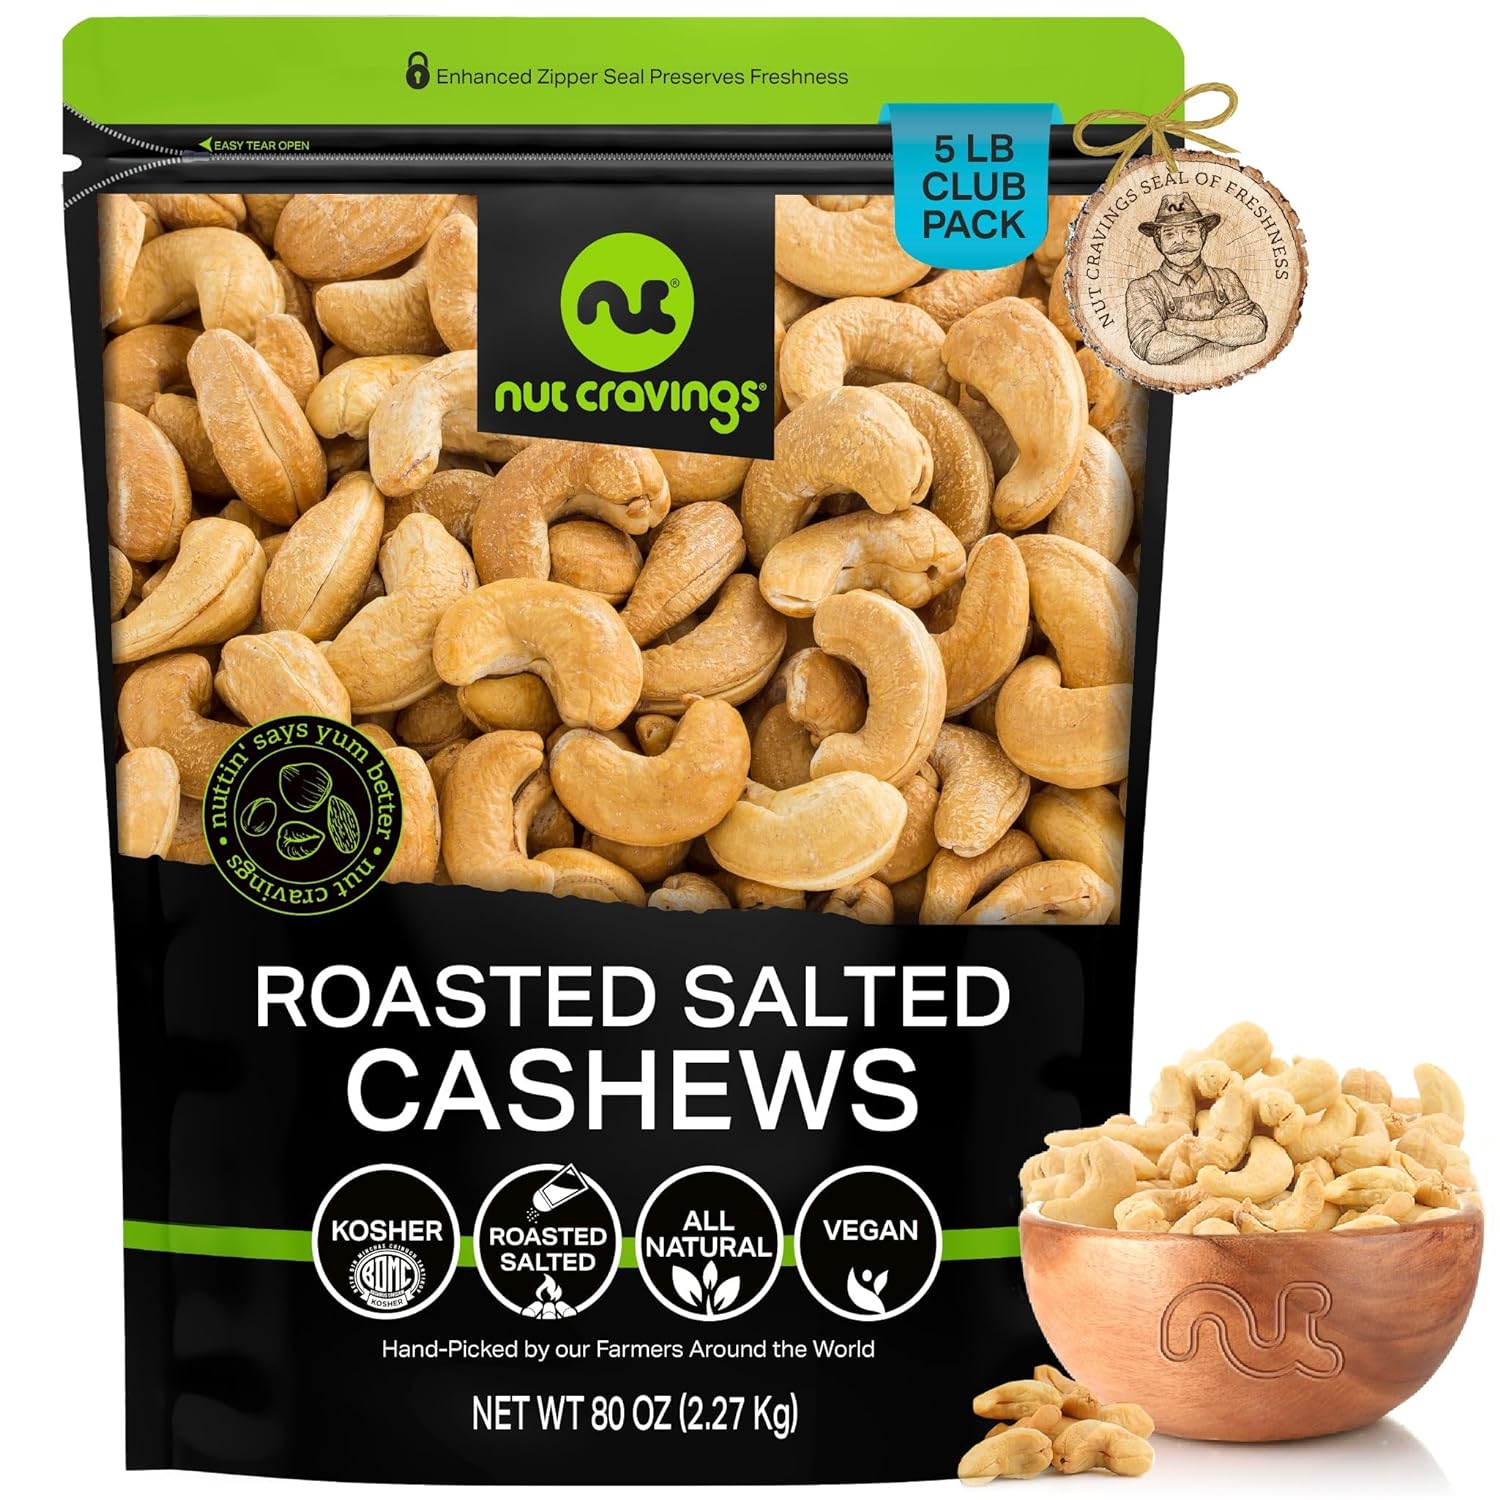 Nut Cravings - Roasted Cashews Slightly Salted - Jumbo, Whole (80oz - 5 LB) Packed Fresh in Resealable Bag - Nut Snack - Healthy Protein Food, All Natural, Keto Friendly, Vegan, Kosher